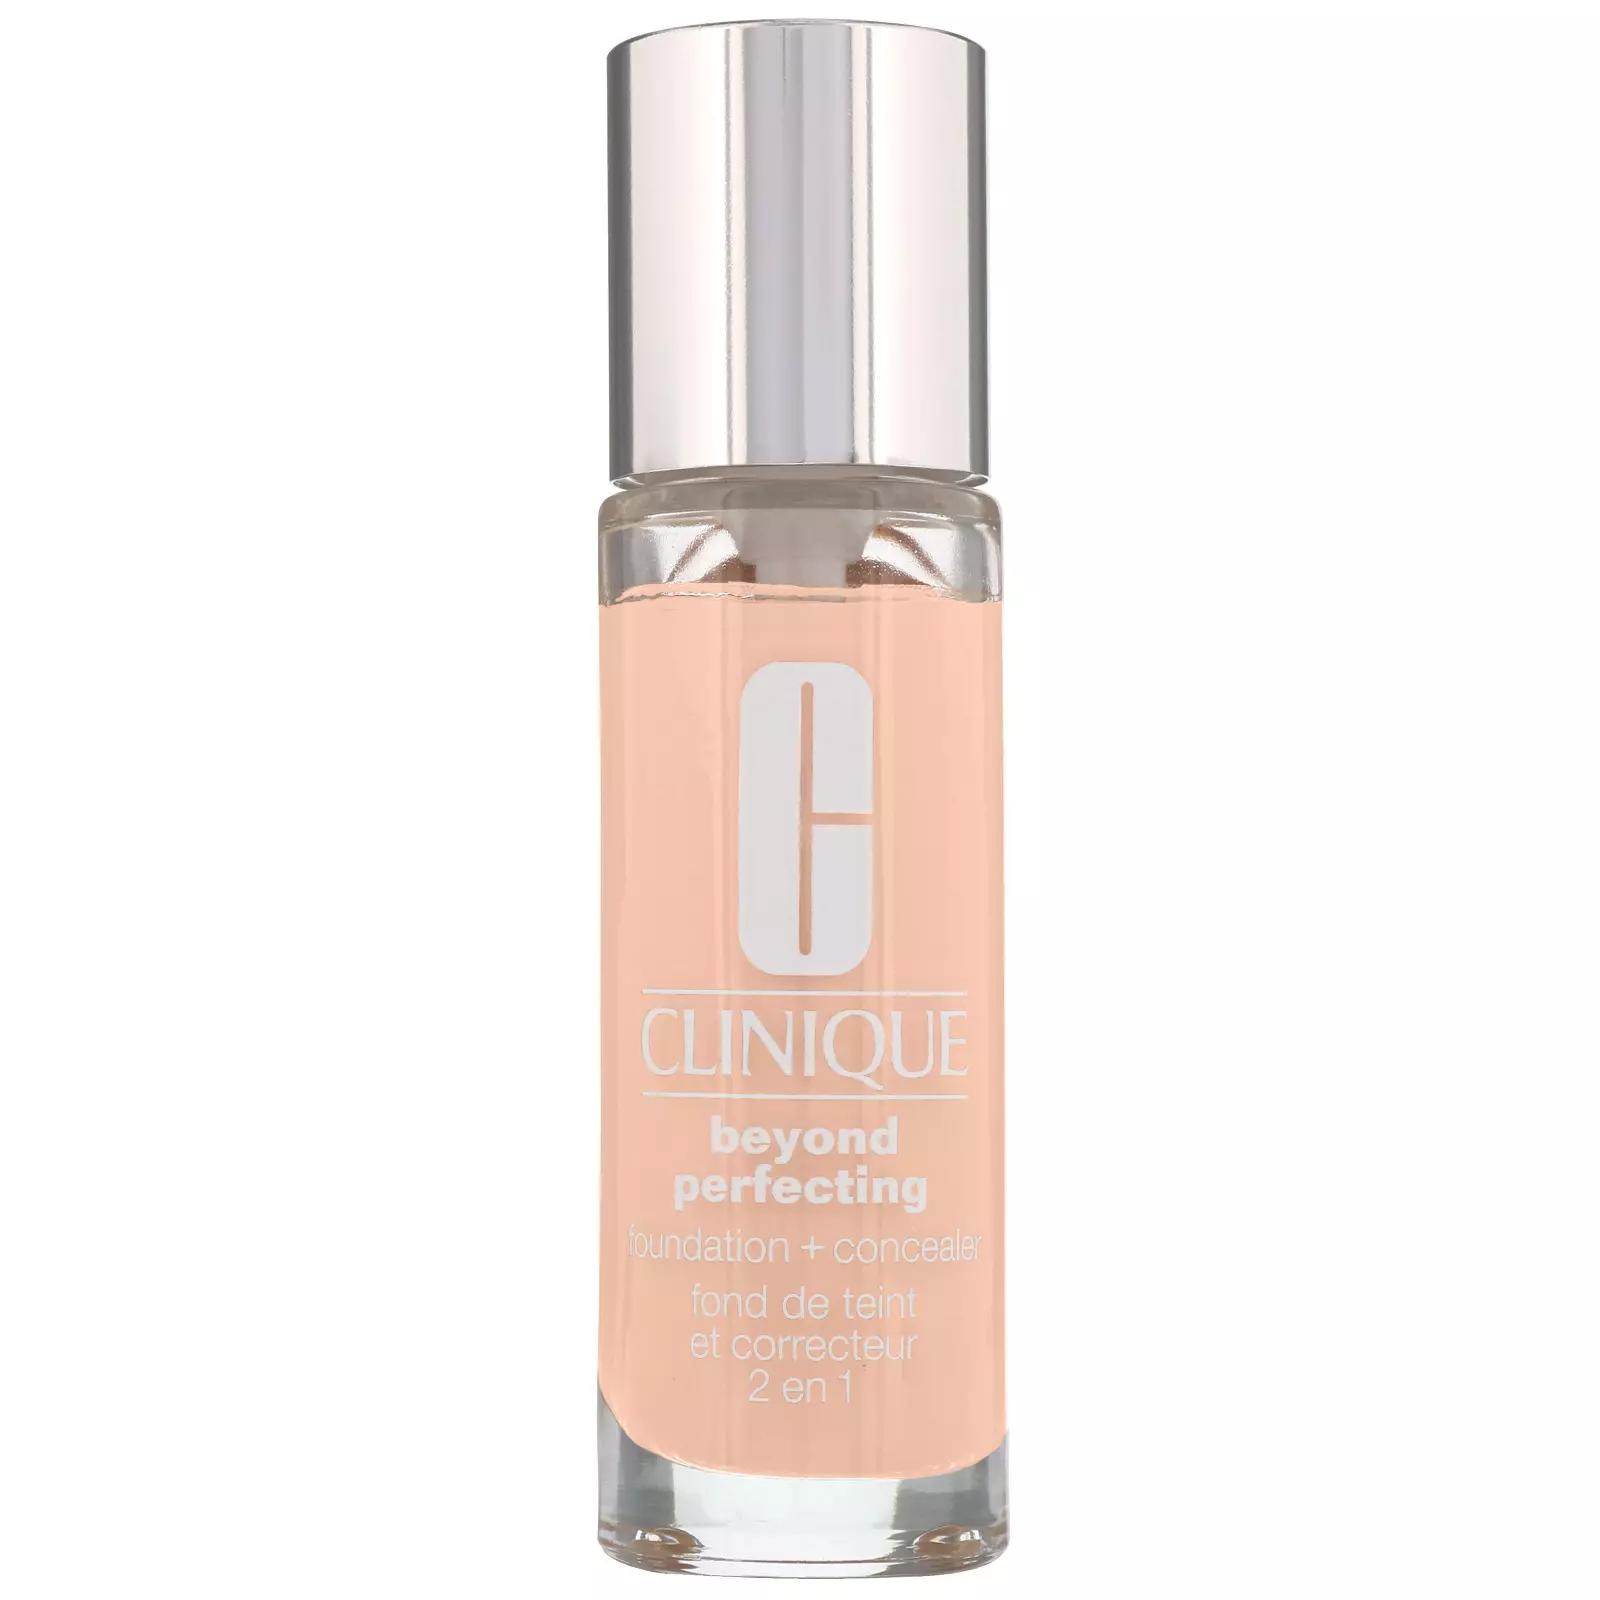 CLINIQUE Beyond Perfecting Foundation + Concealer 02 Alabaster